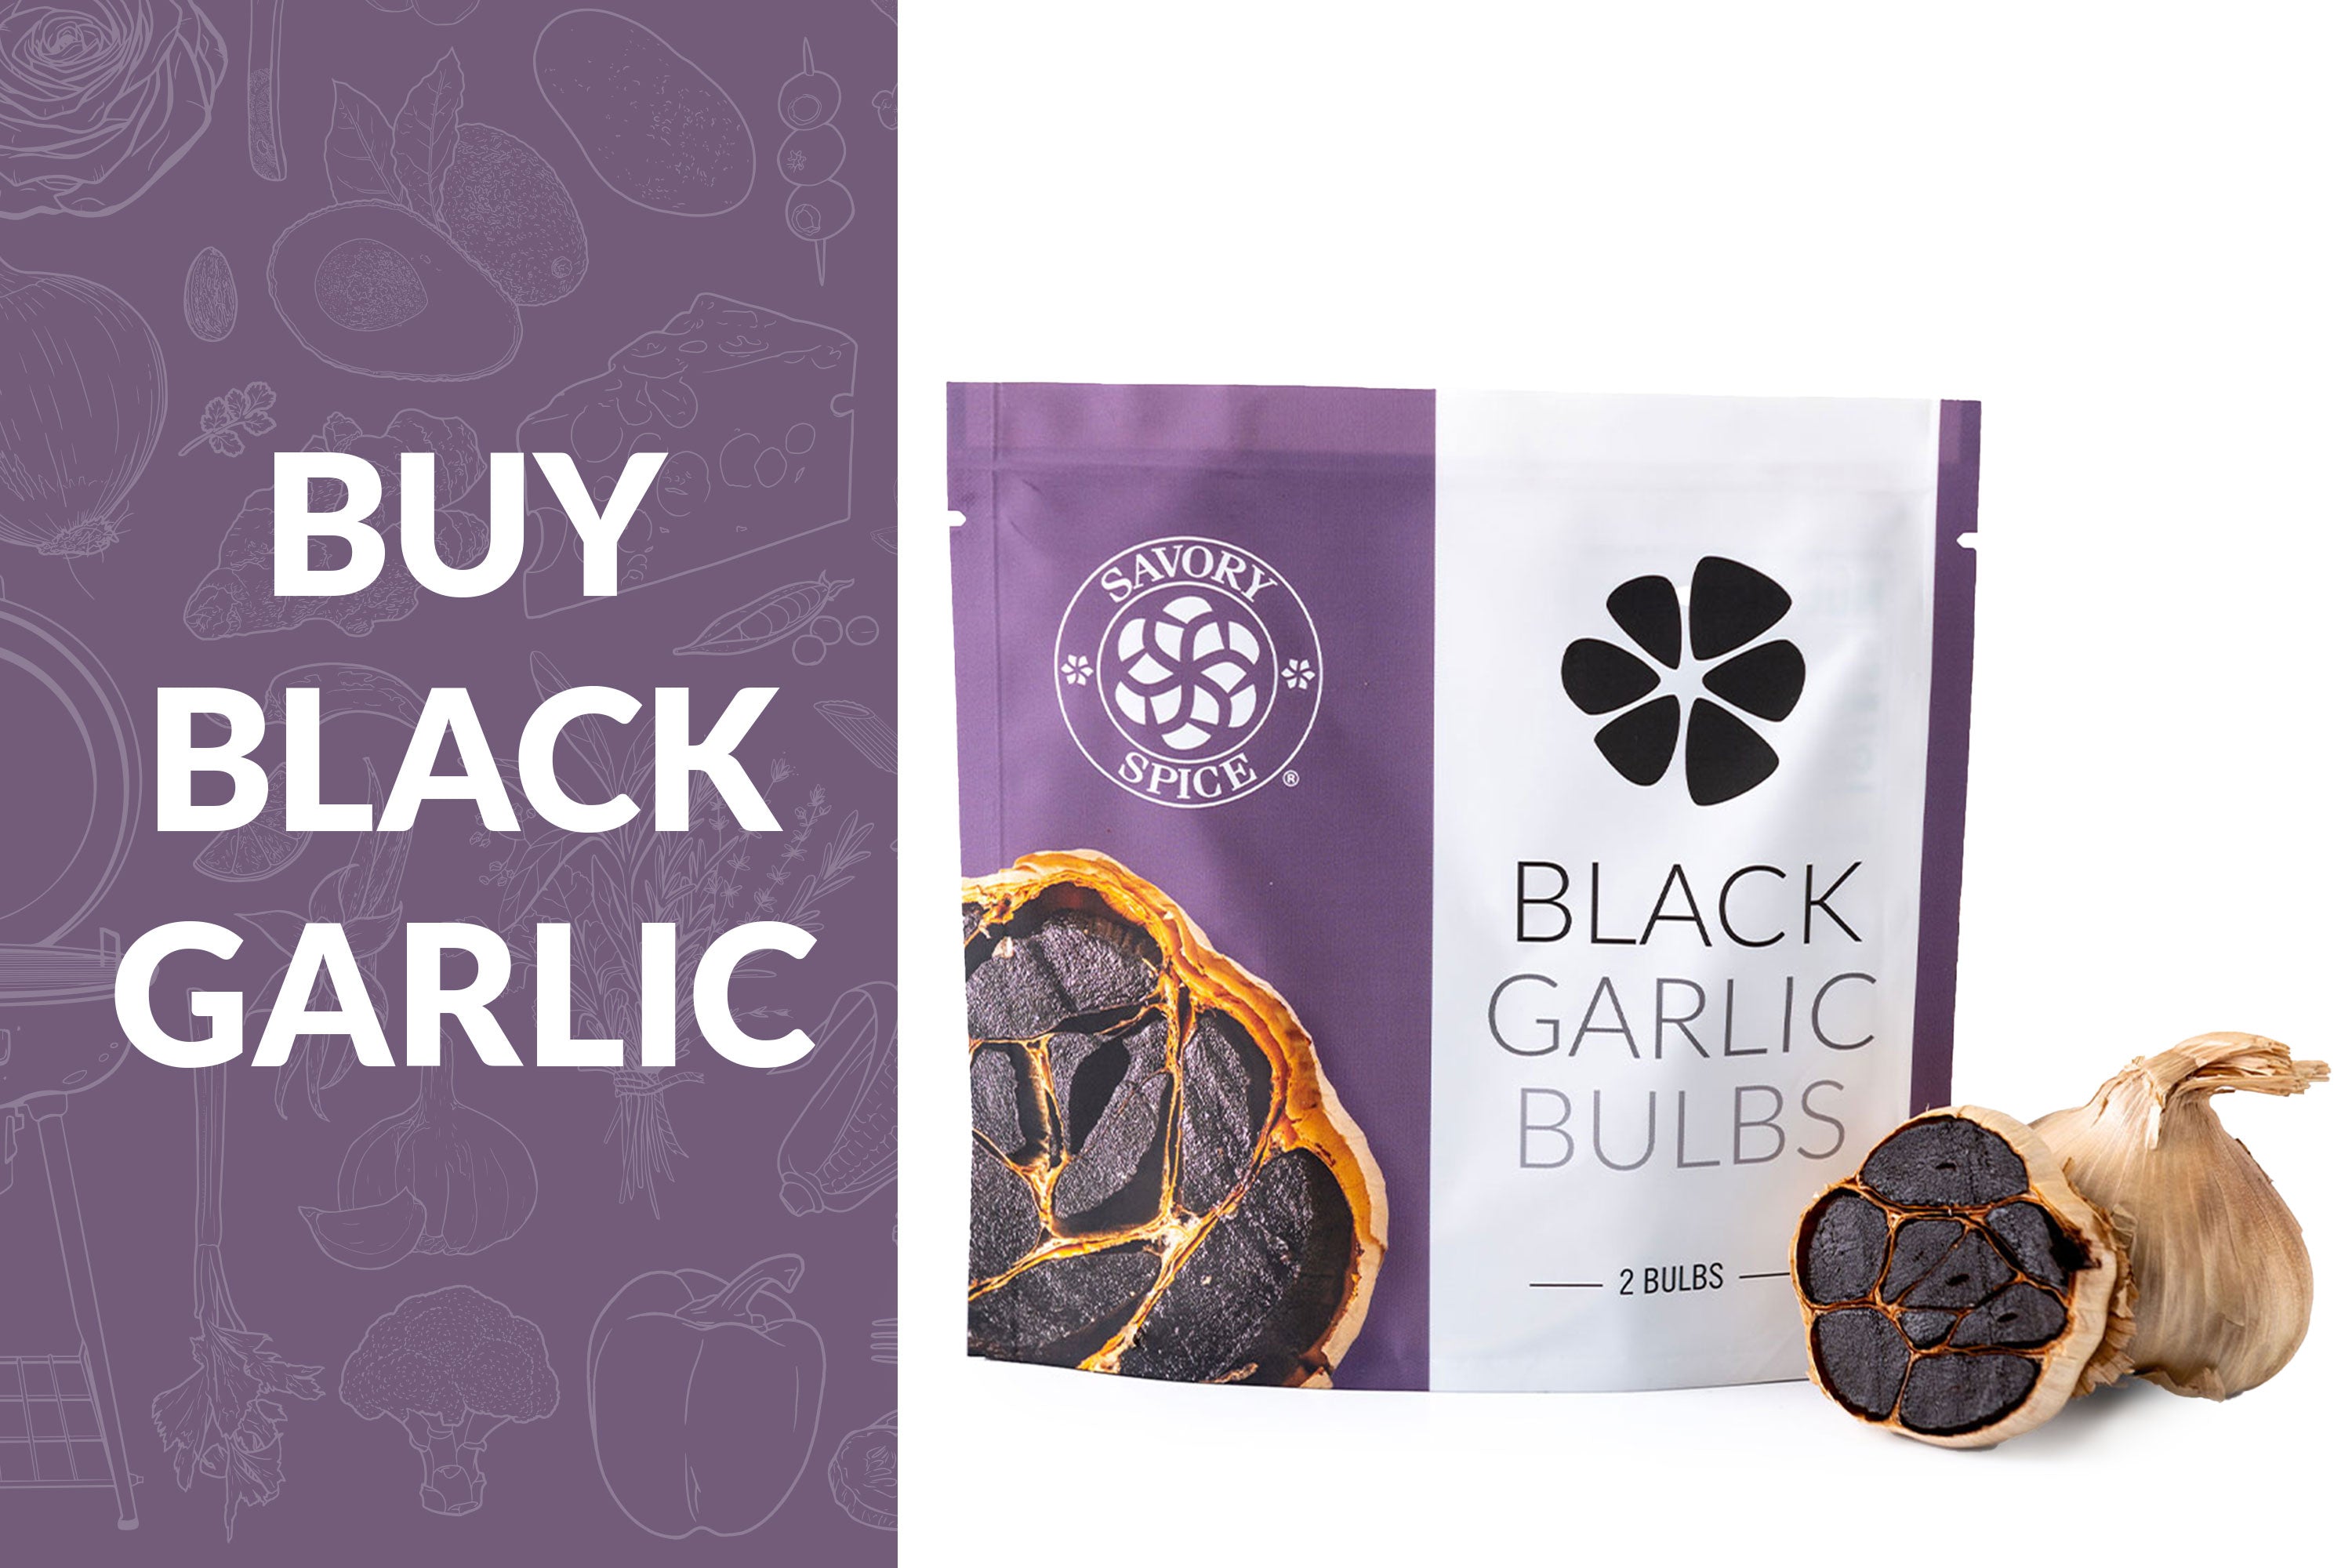 Buy Black Garlic text on purple with package of Black Garlic Bulbs to the right